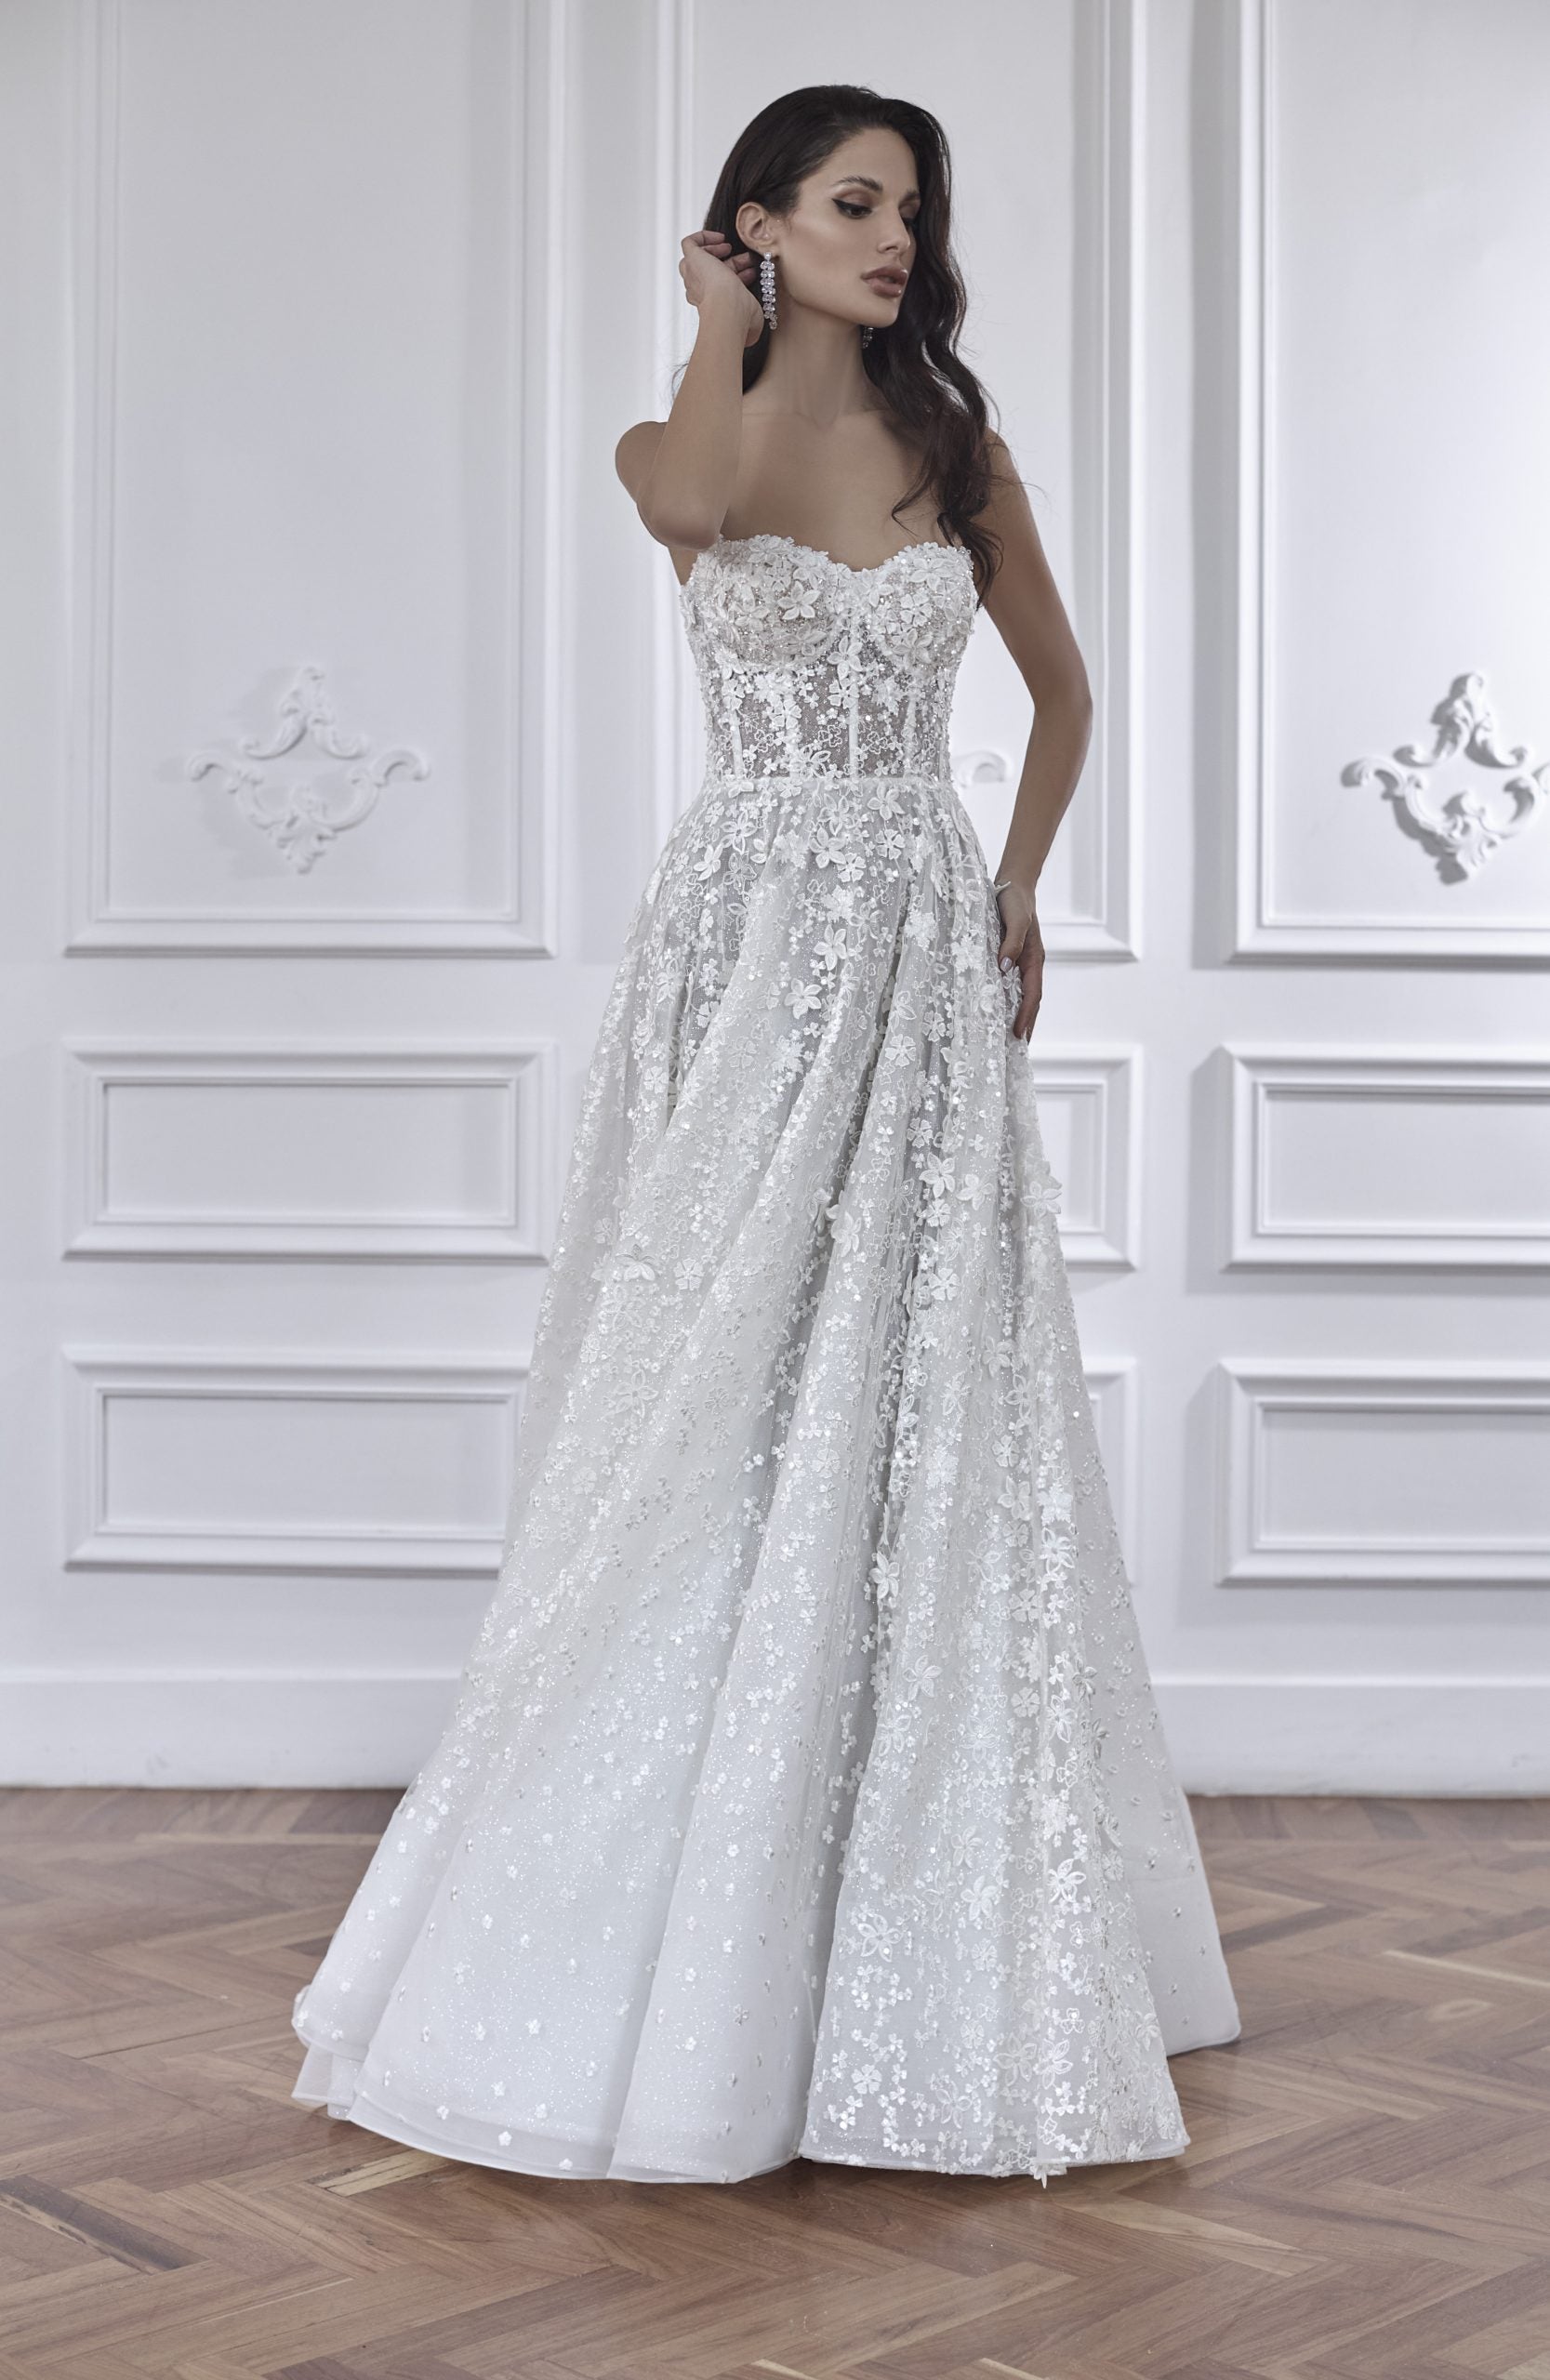 Strapless A-line Wedding Dress With 3D Floral Embroidery by Maison Signore - Image 1